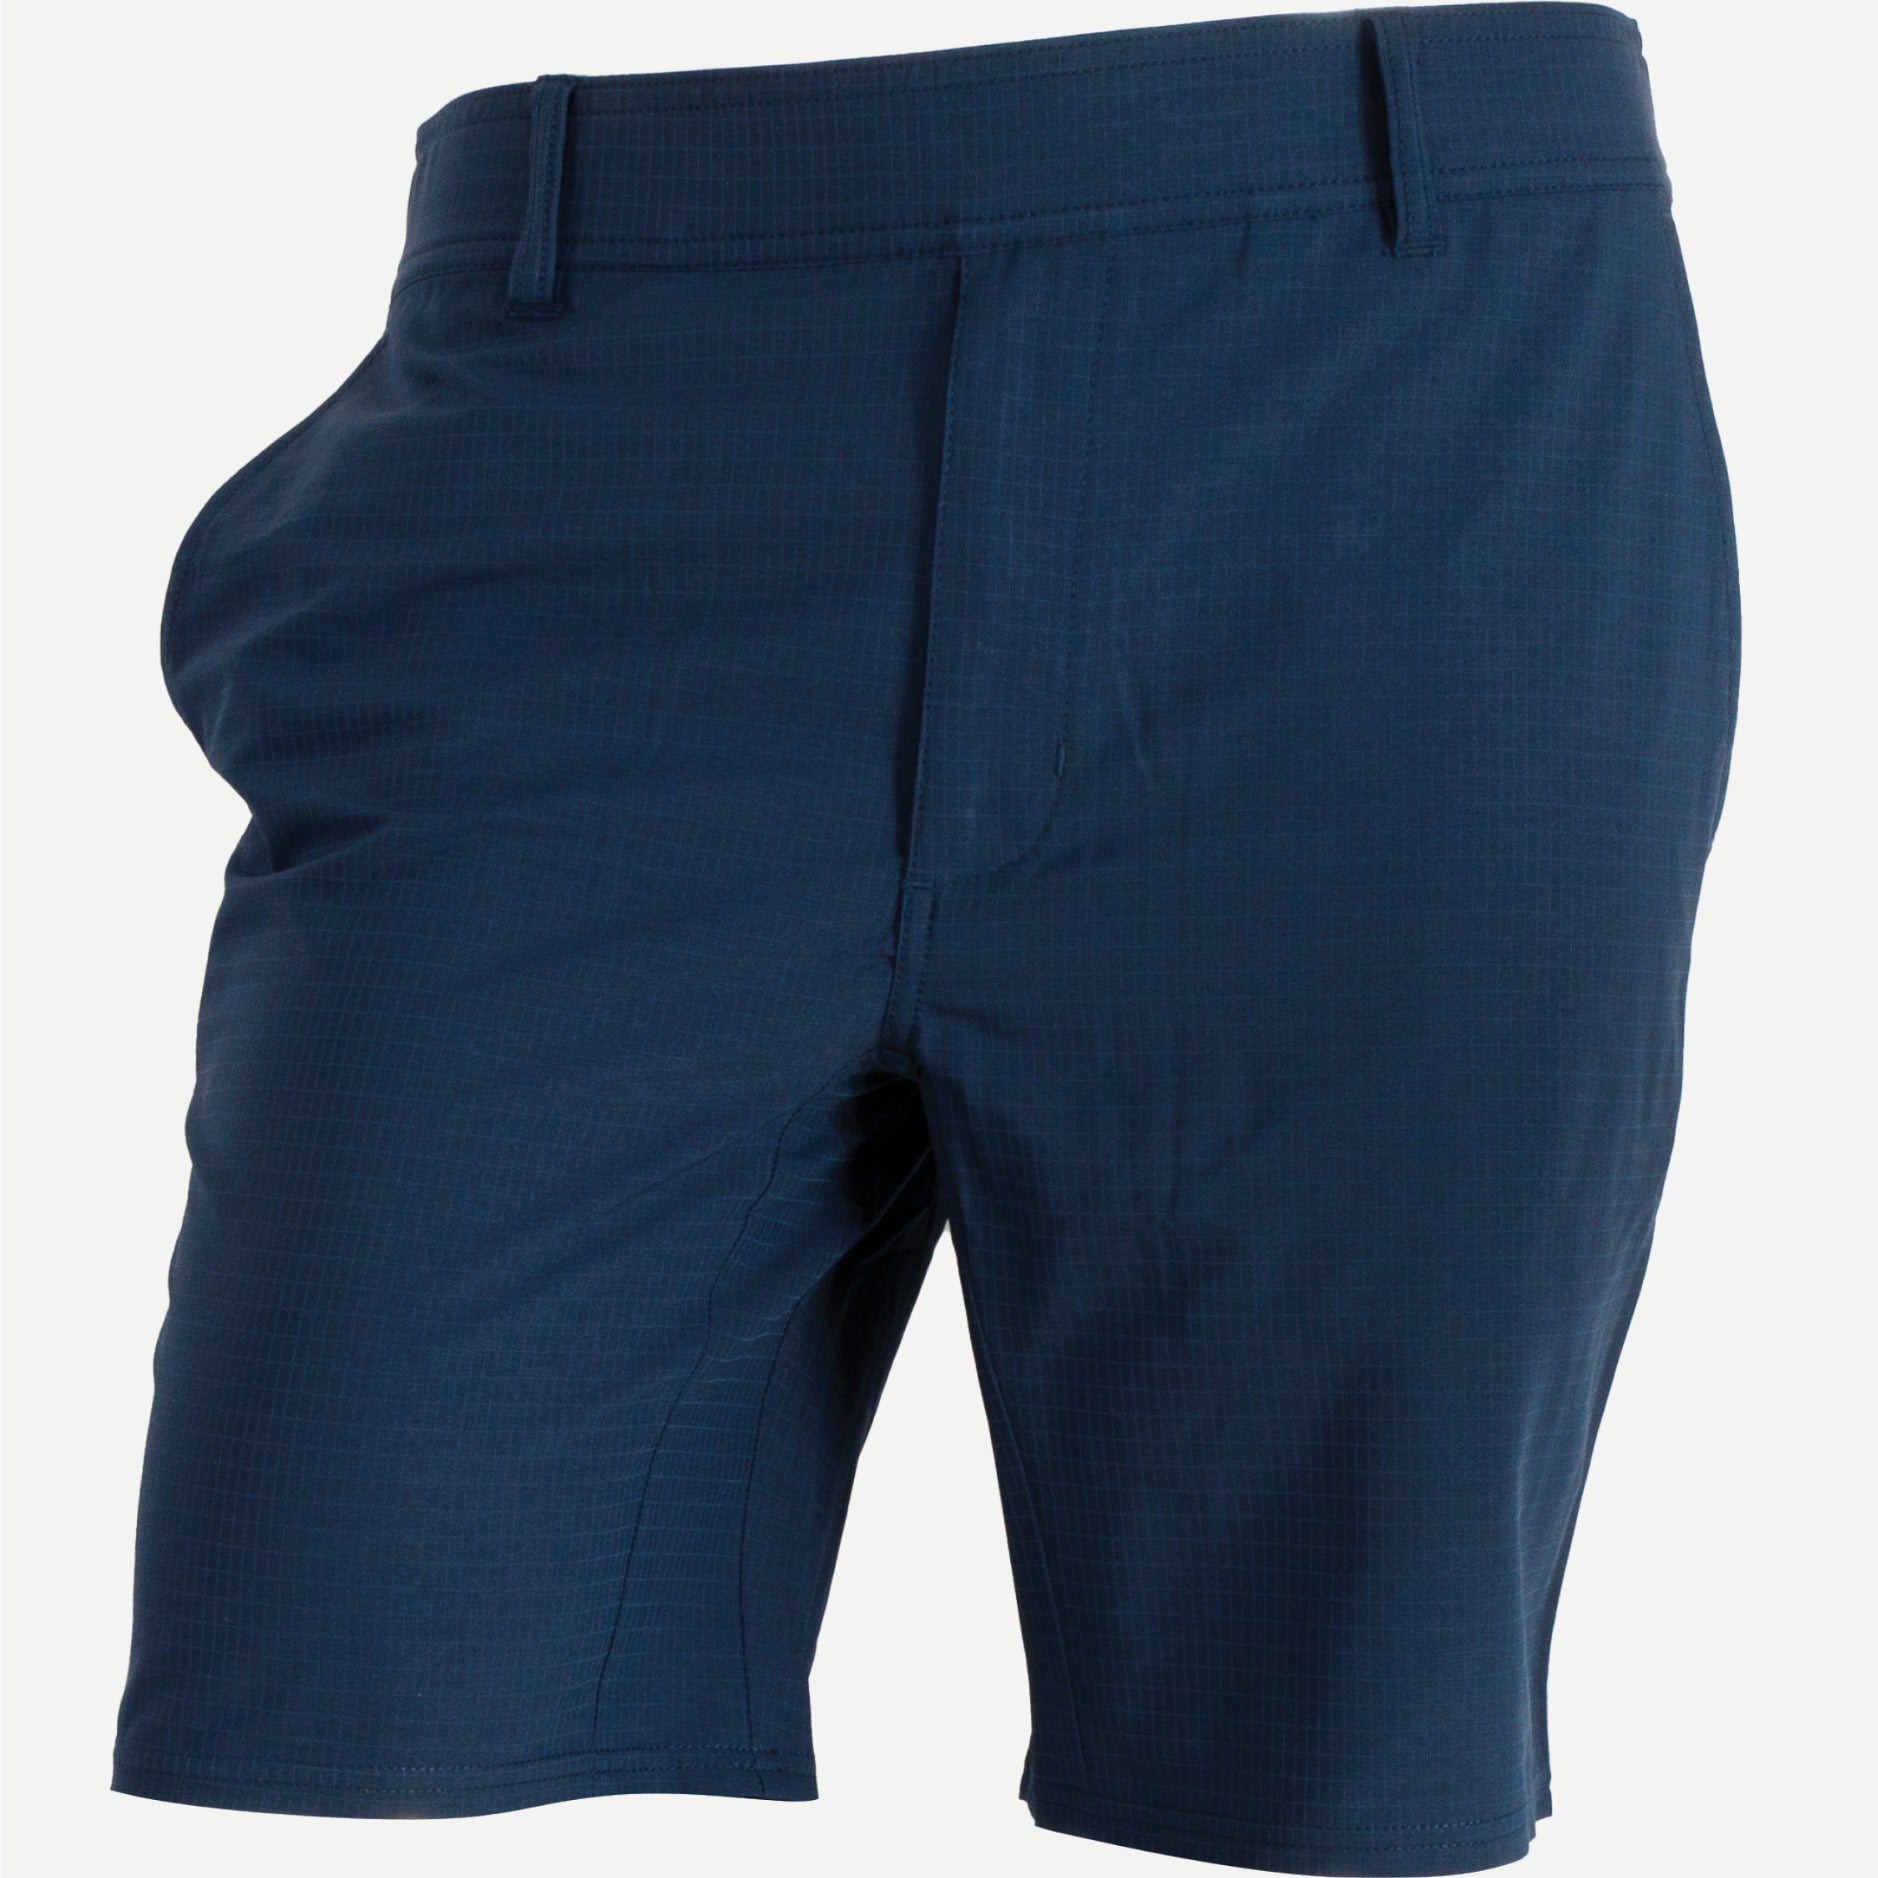 SOLUTION SHORT - NAVY – AndersonOrd Performance Apparel